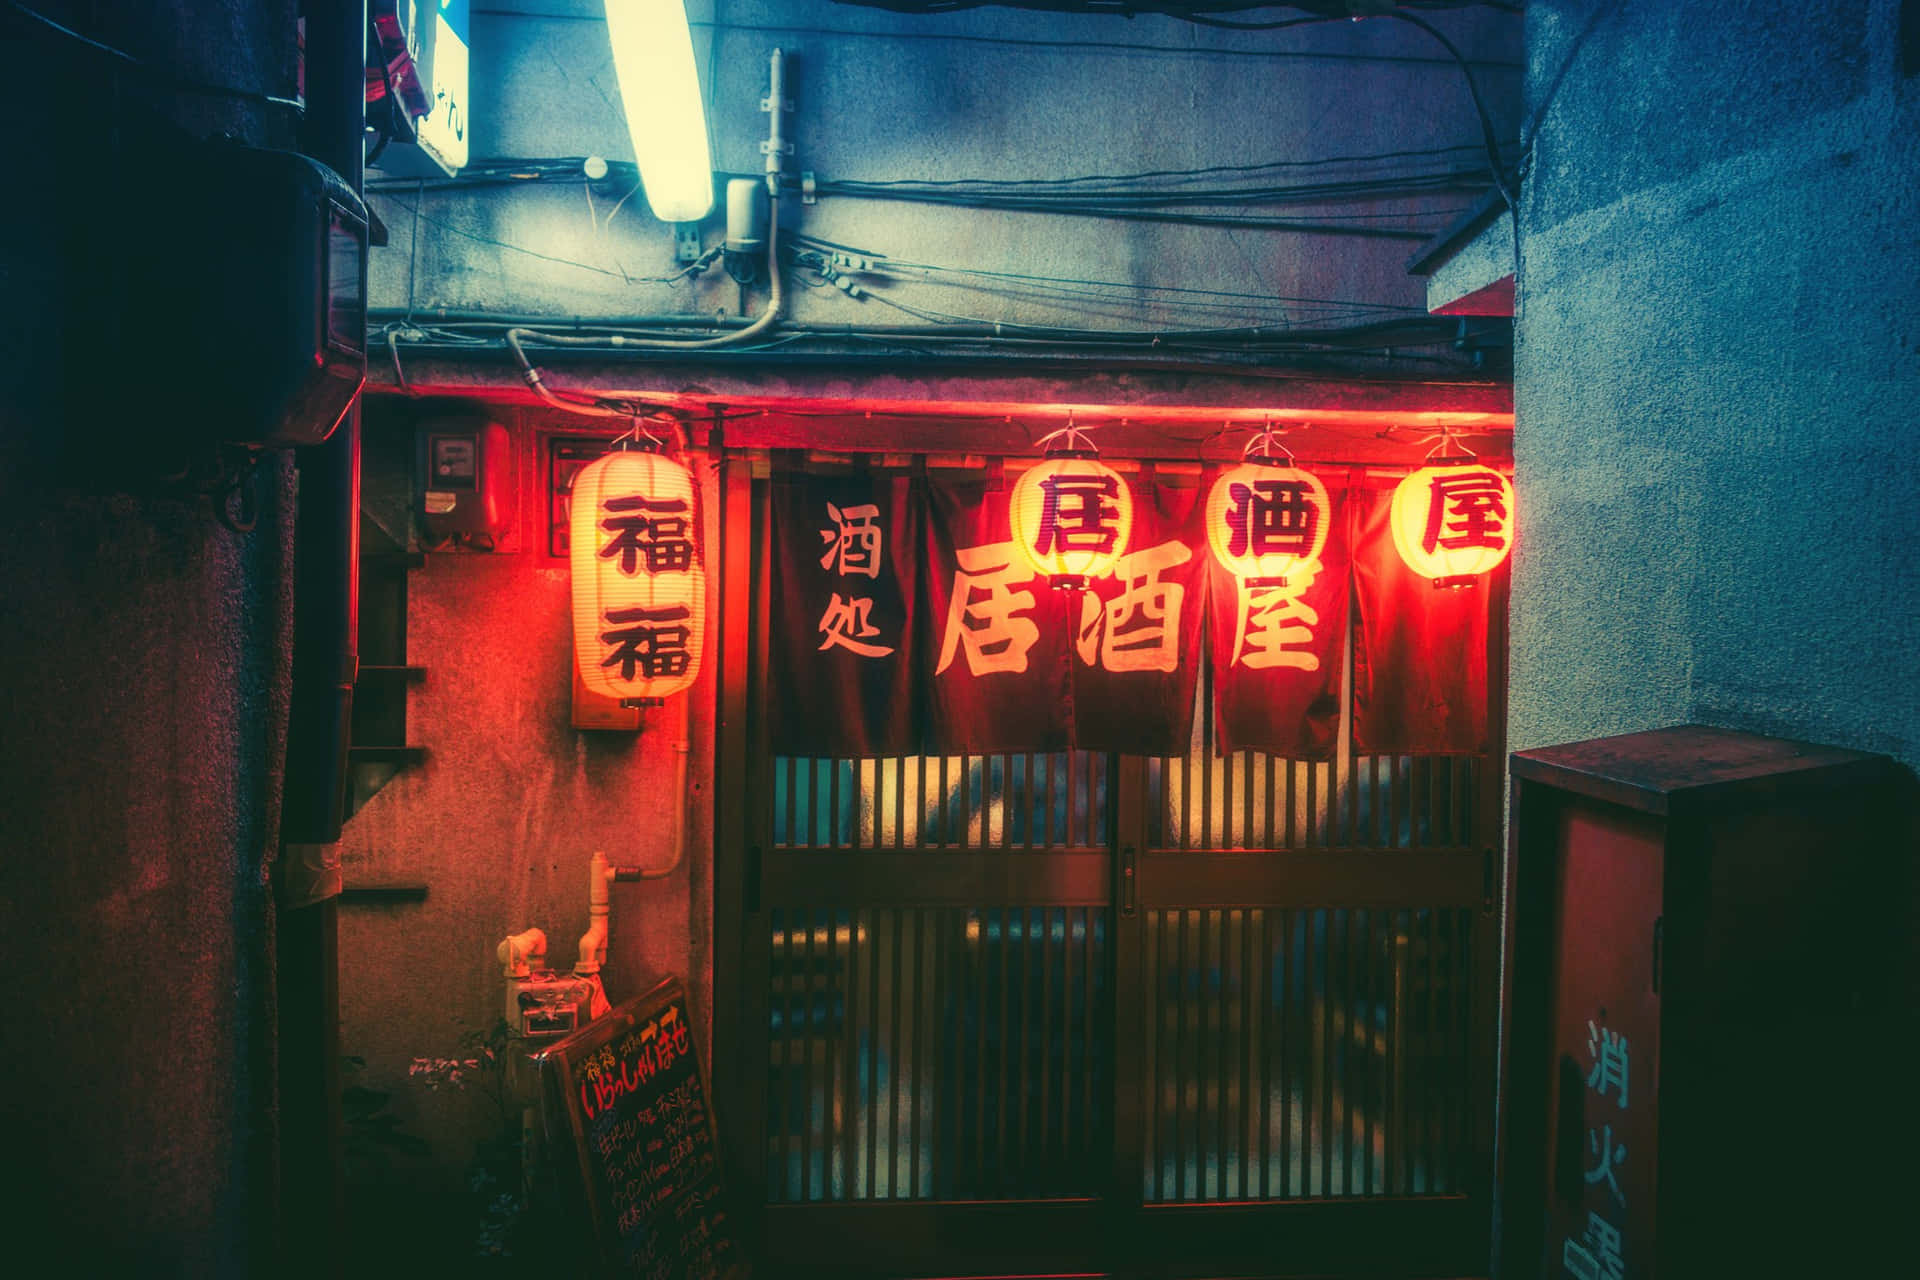 Explore Midtown Tokyo's streets and you are sure to come across an exciting array of neon colors Wallpaper